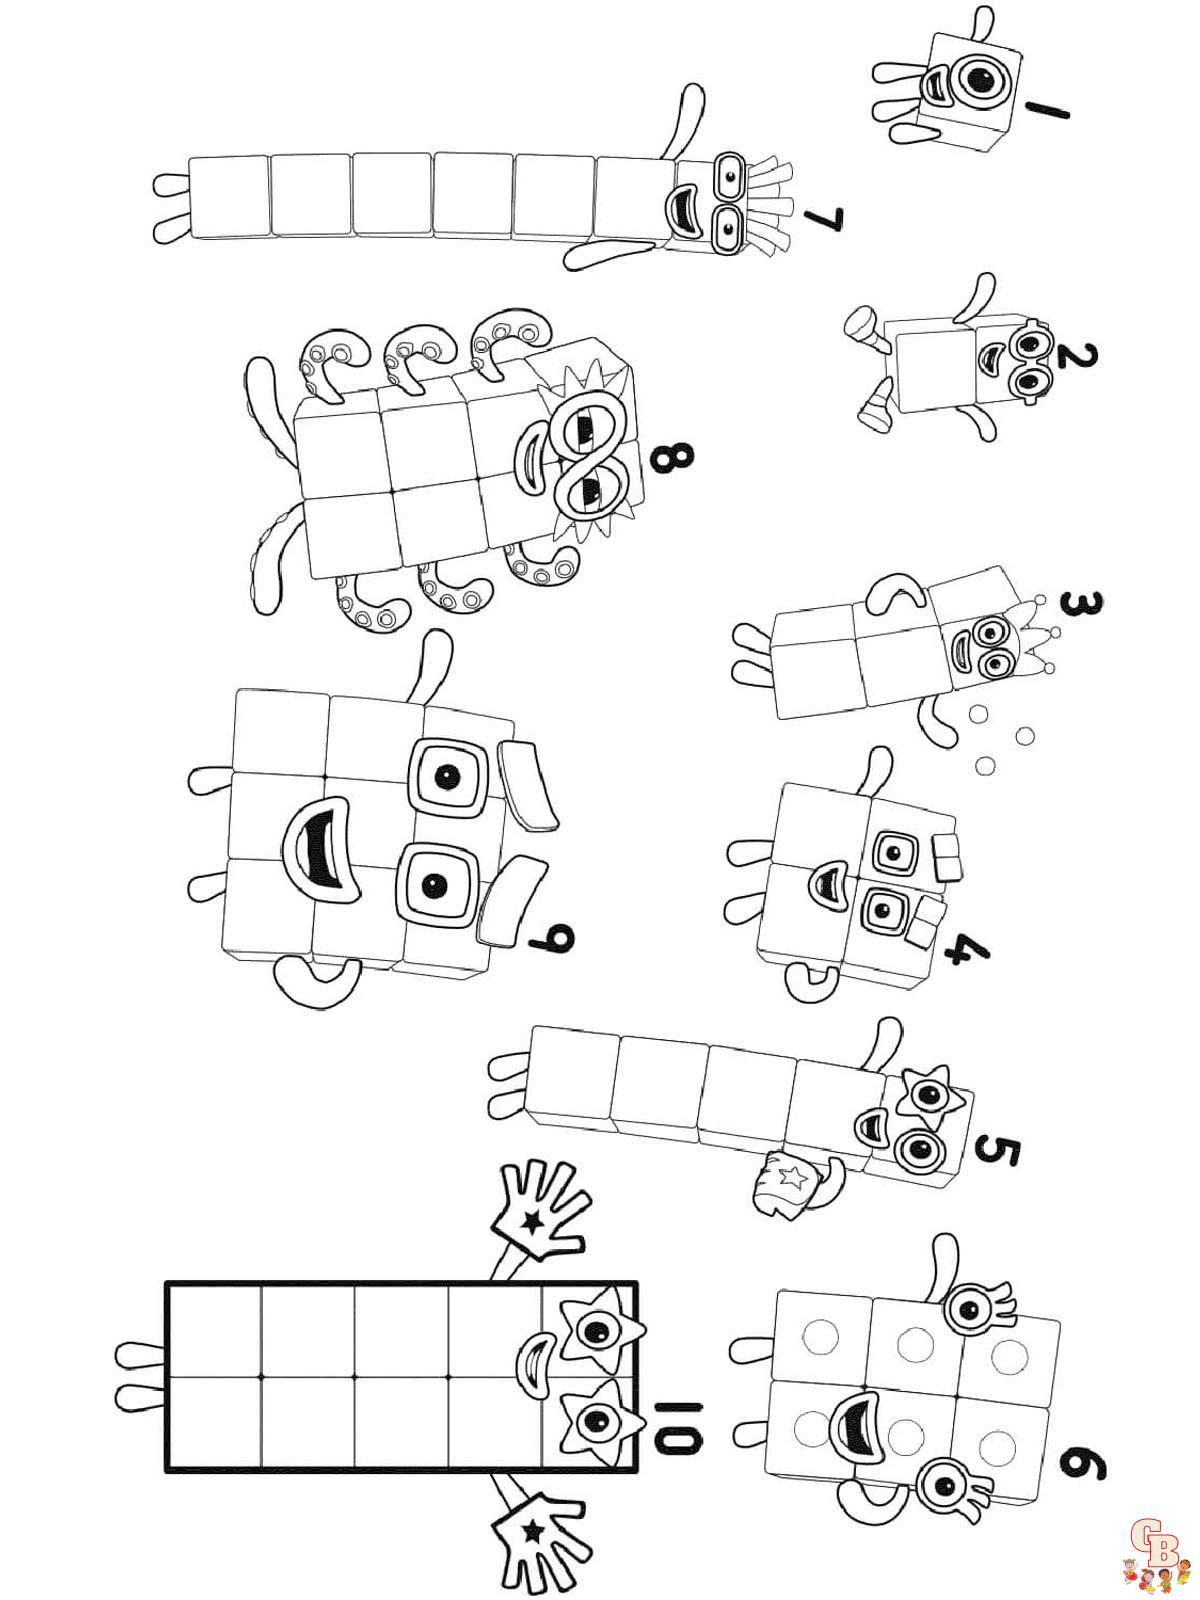 Numberblocks Coloring Pages